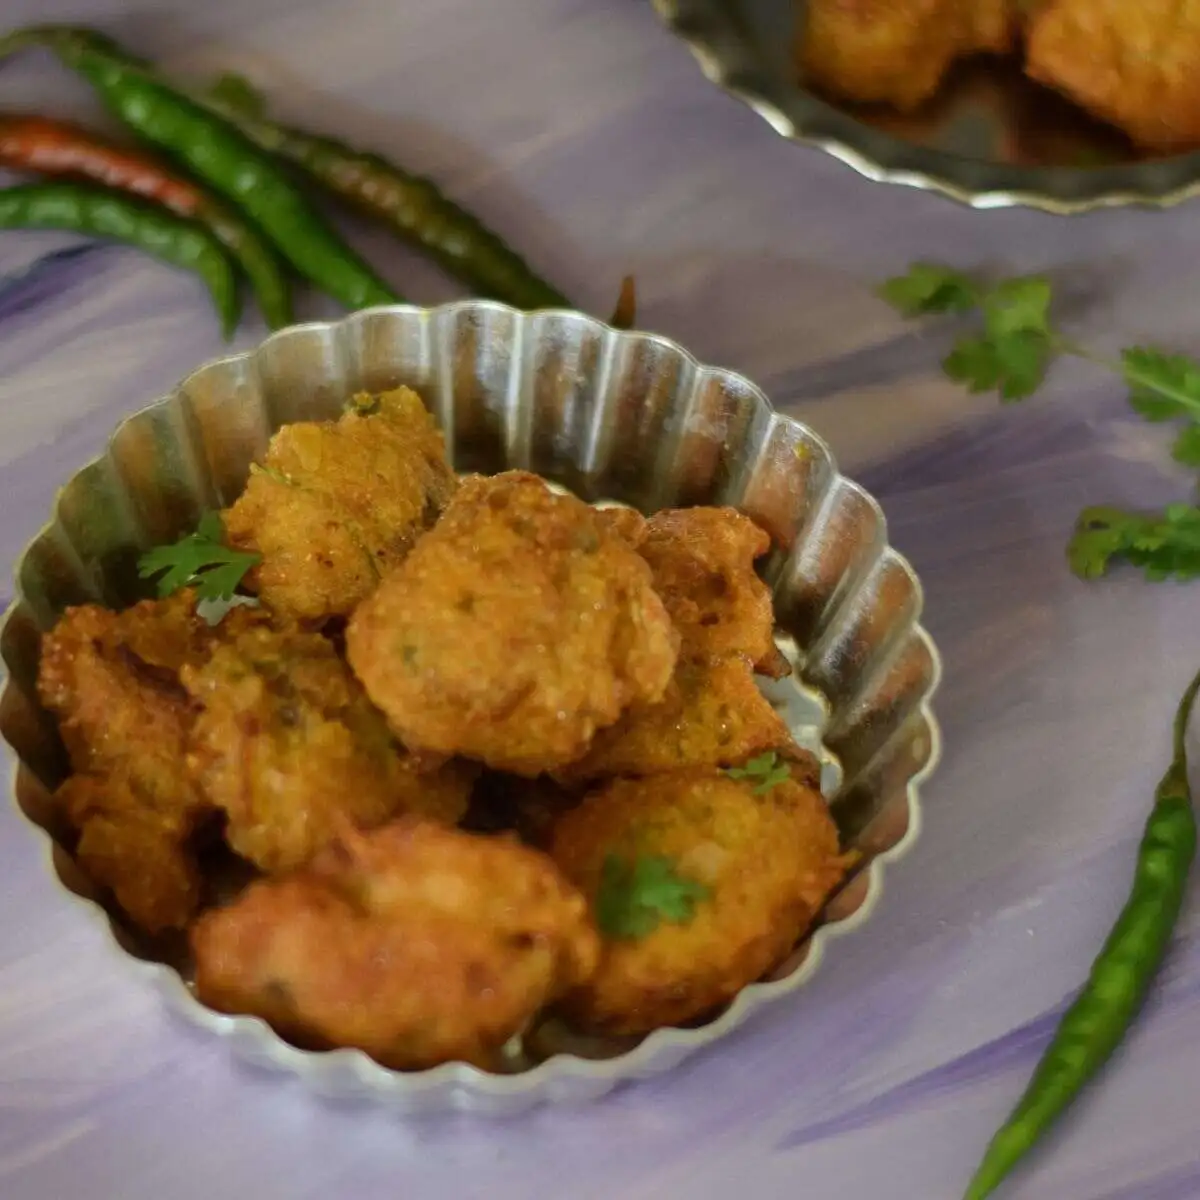 Fish roe fritters served on a plate along with green chilli and coriander leaves